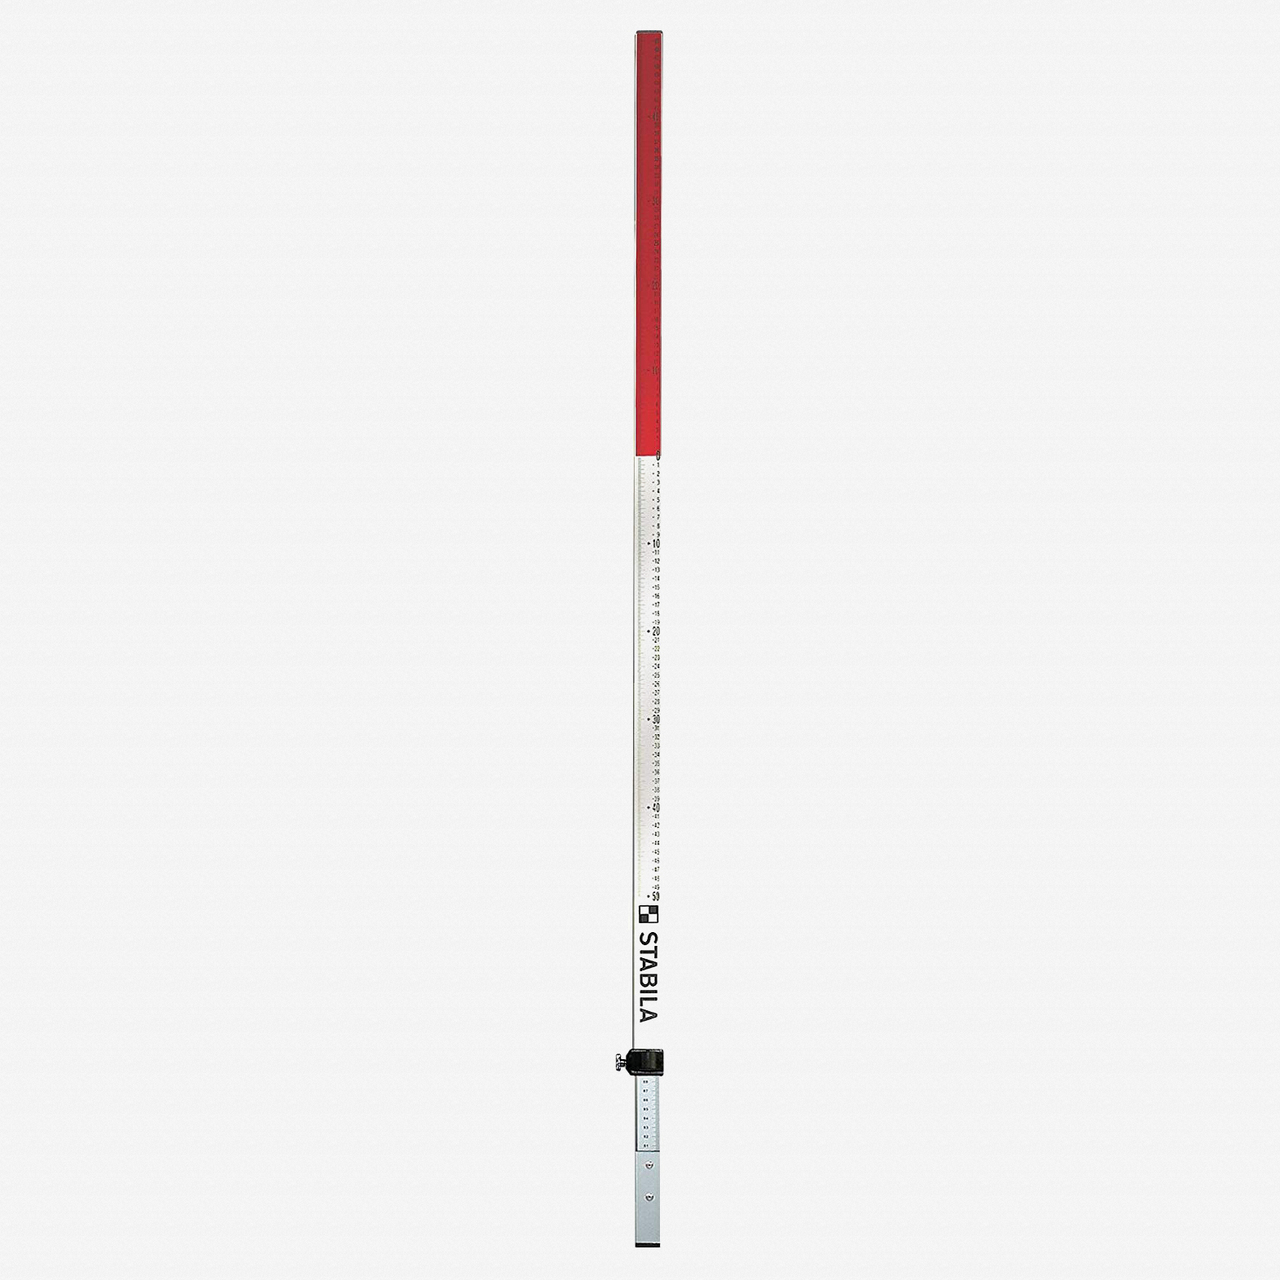 Stabila 07469 Hi-Lo Elevation Rod, Adjustable 52in - 7ft Imperial and Metric scales - KC Tool